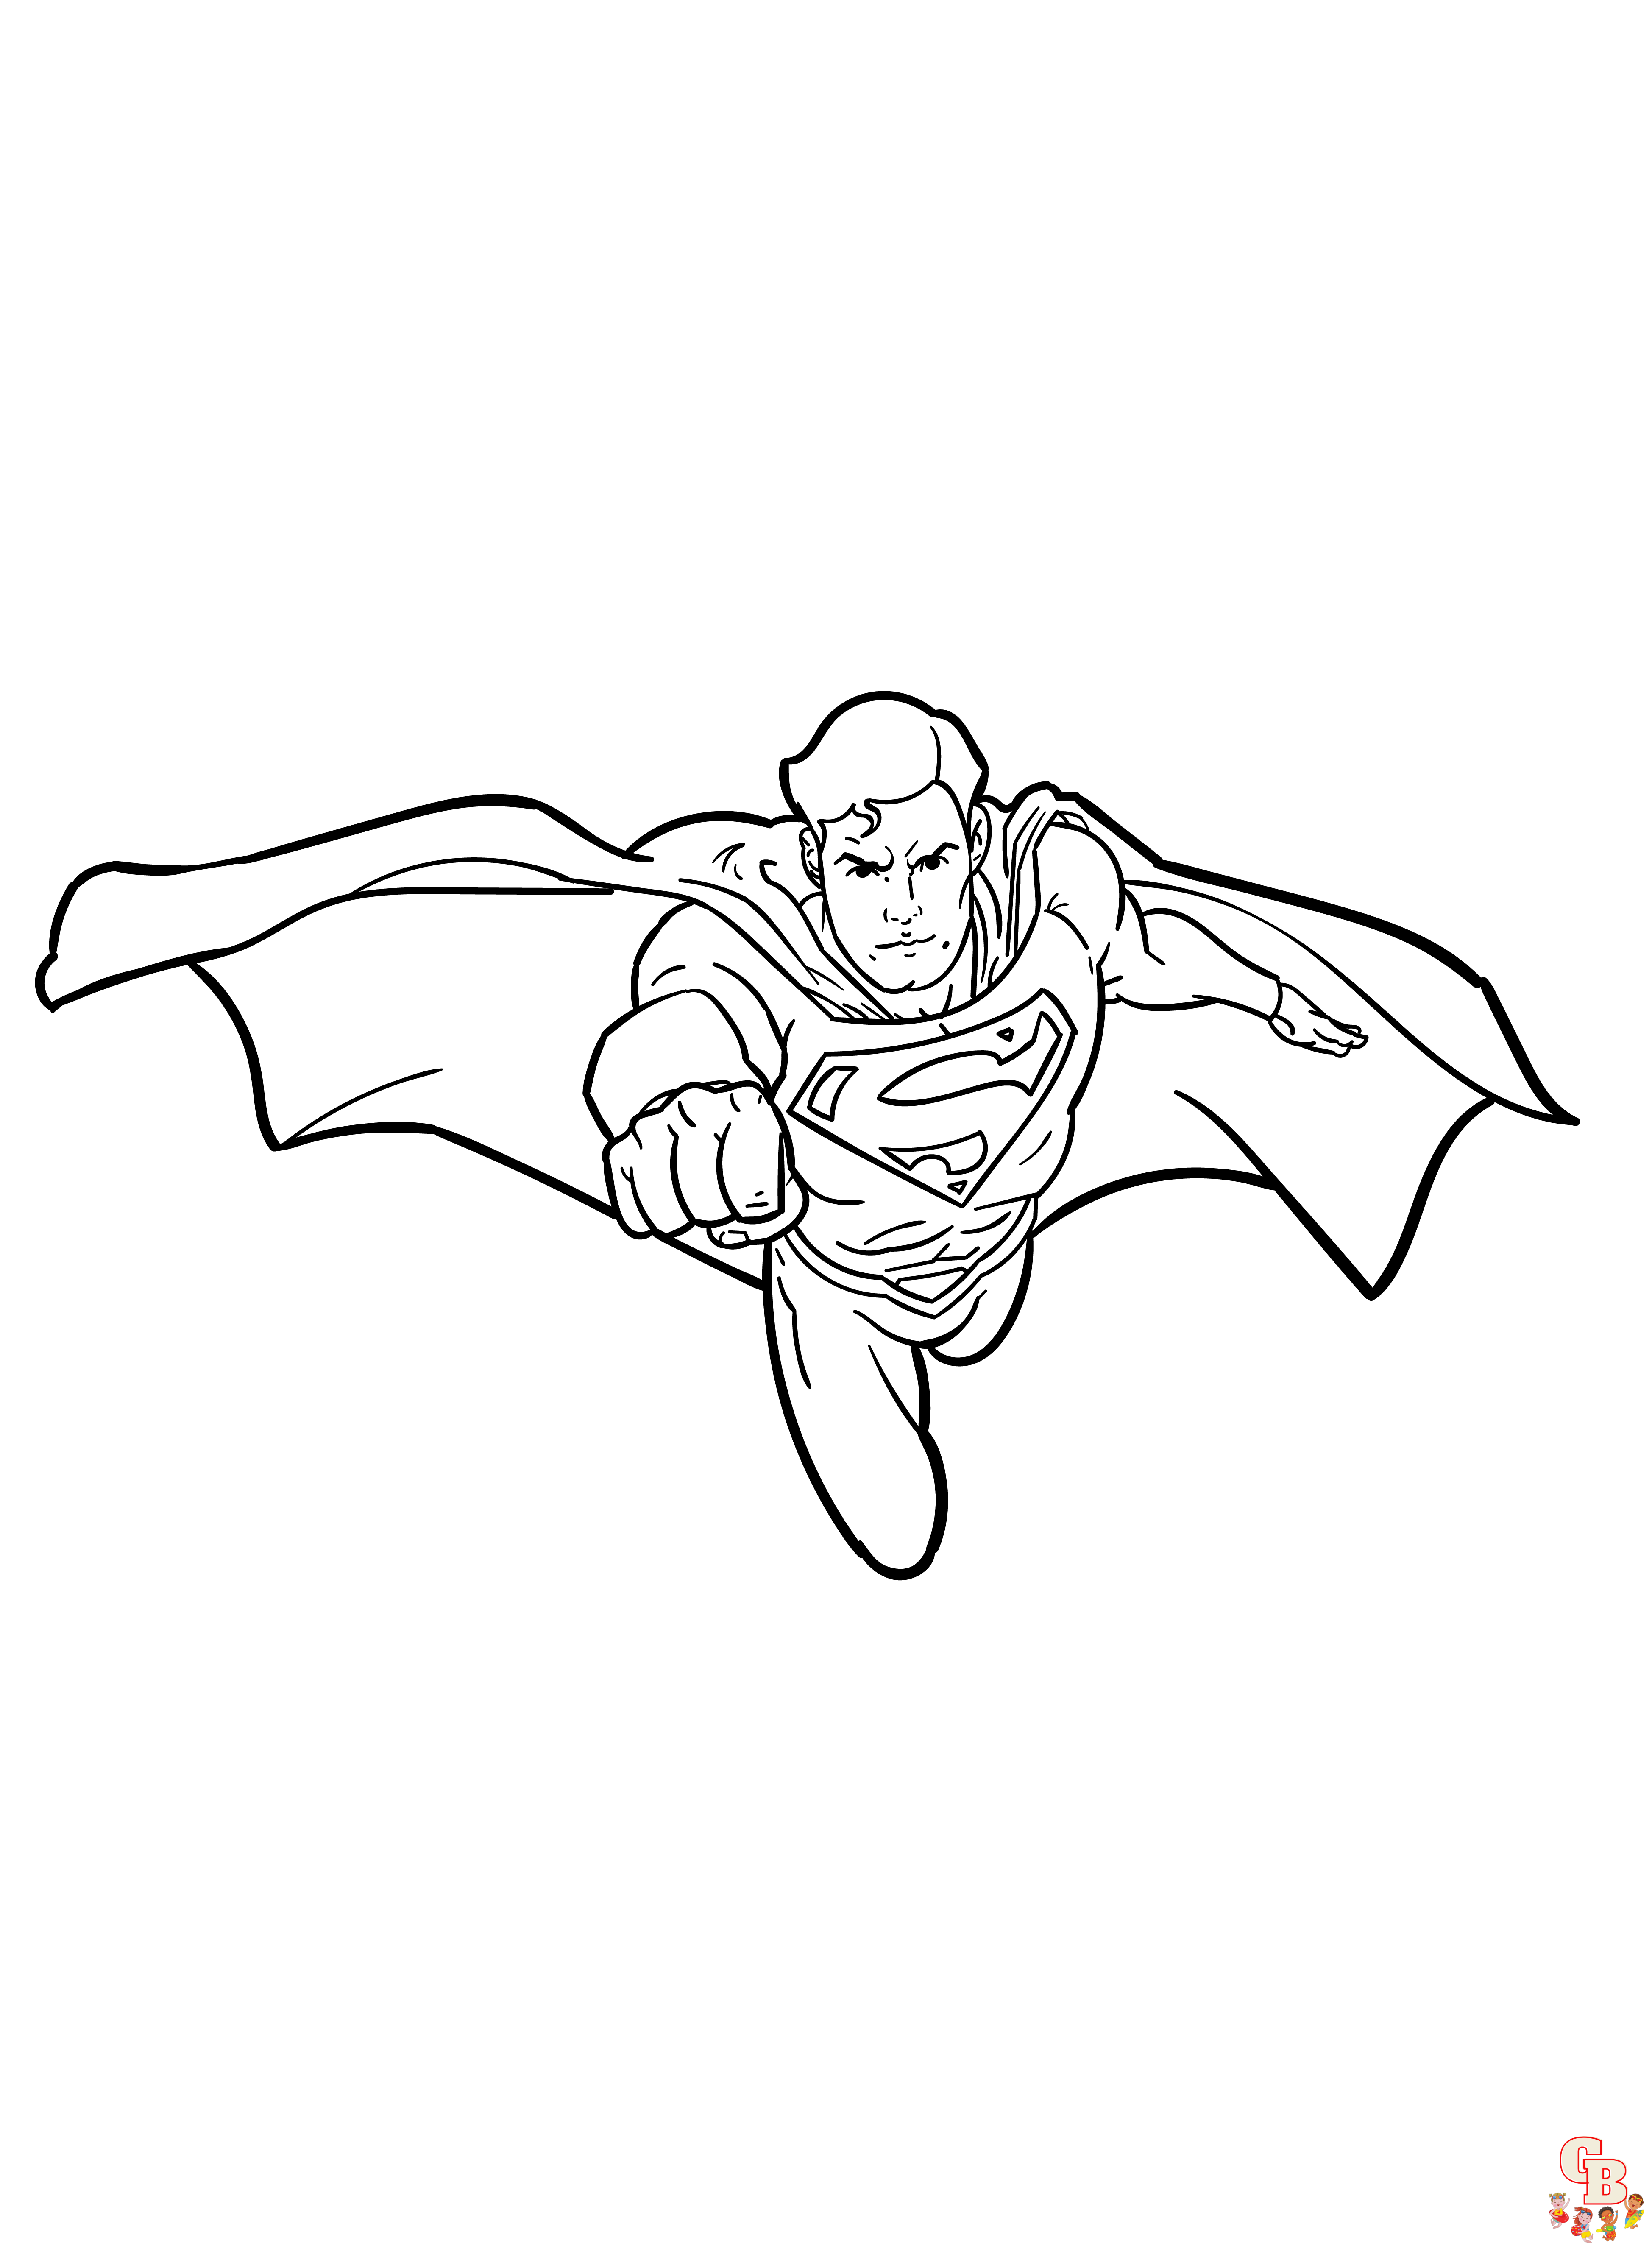 Get creative with free printable superman coloring pages